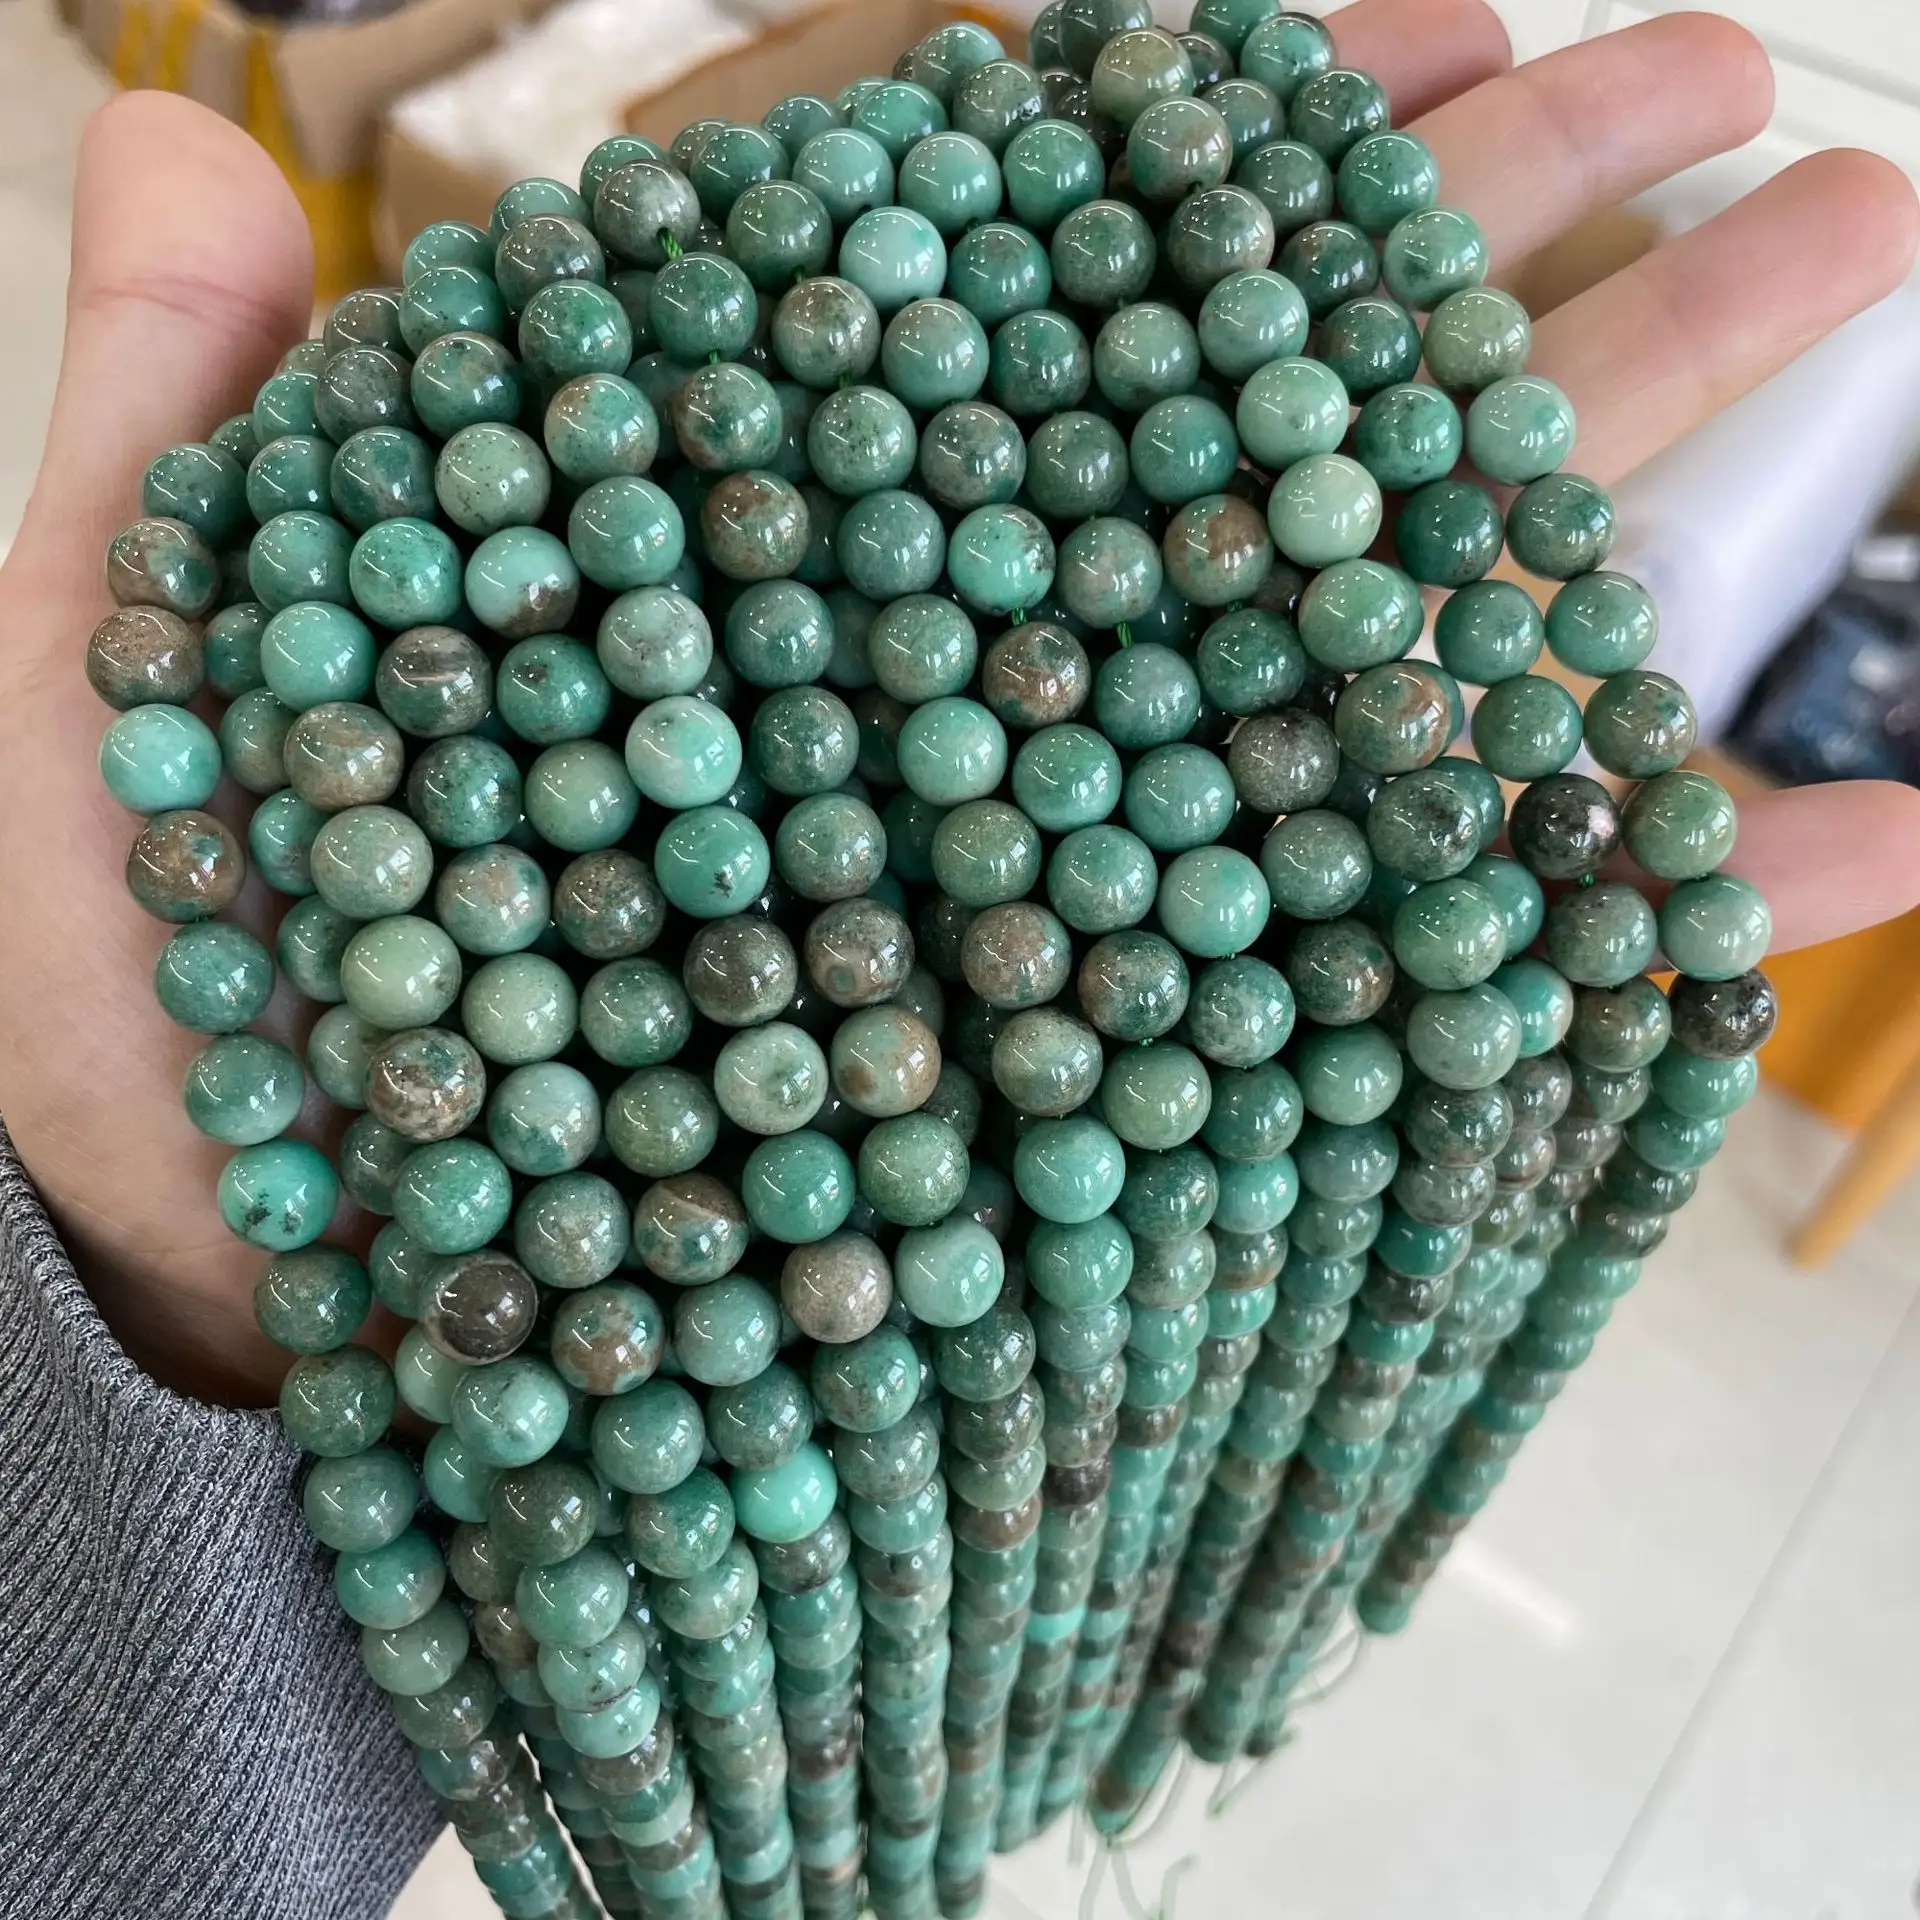 wholesale healing stone loose beads jewelry natural birthstone quartz stone beads green turquoise agate